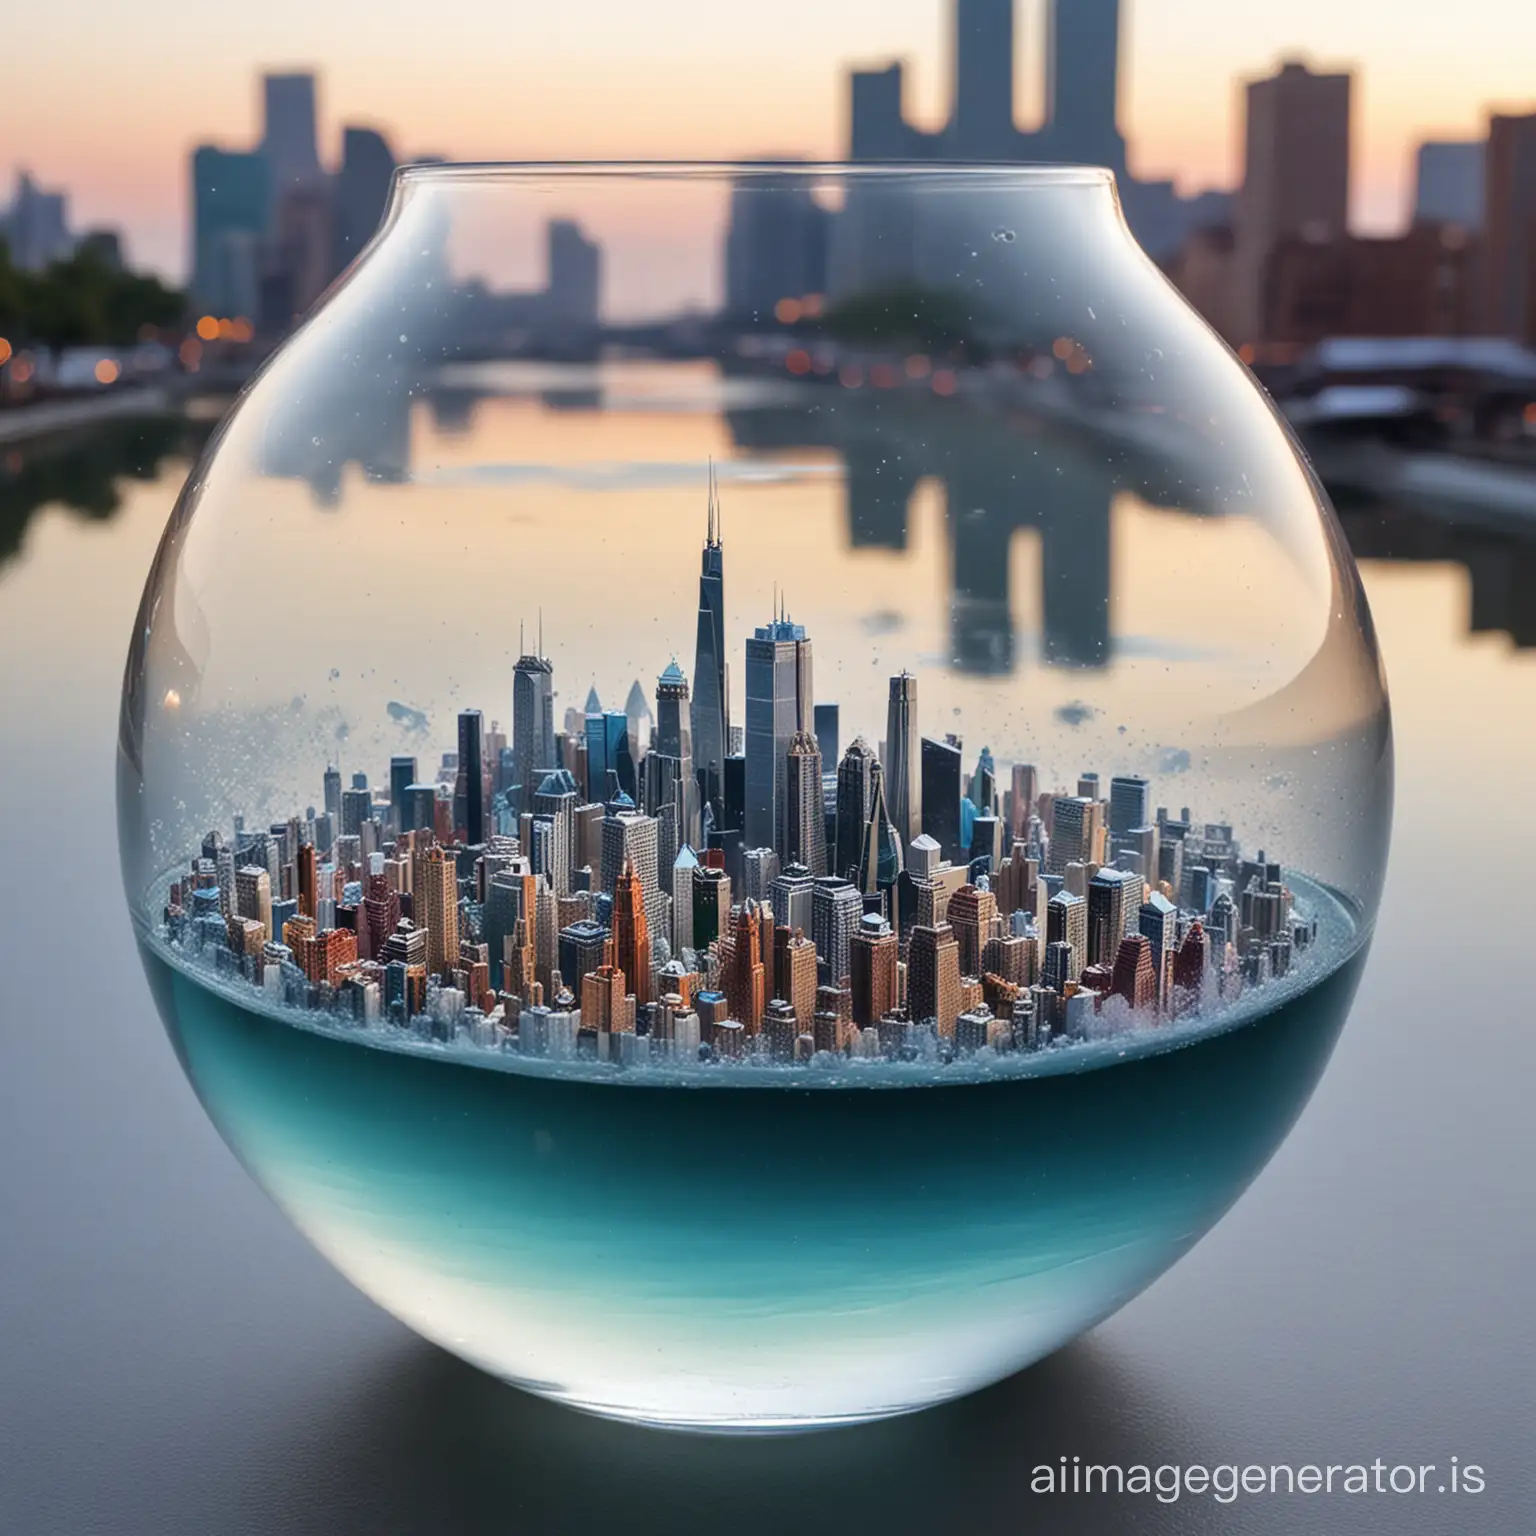 One withCrystal powder with a city in the bottom of the glass and water on top